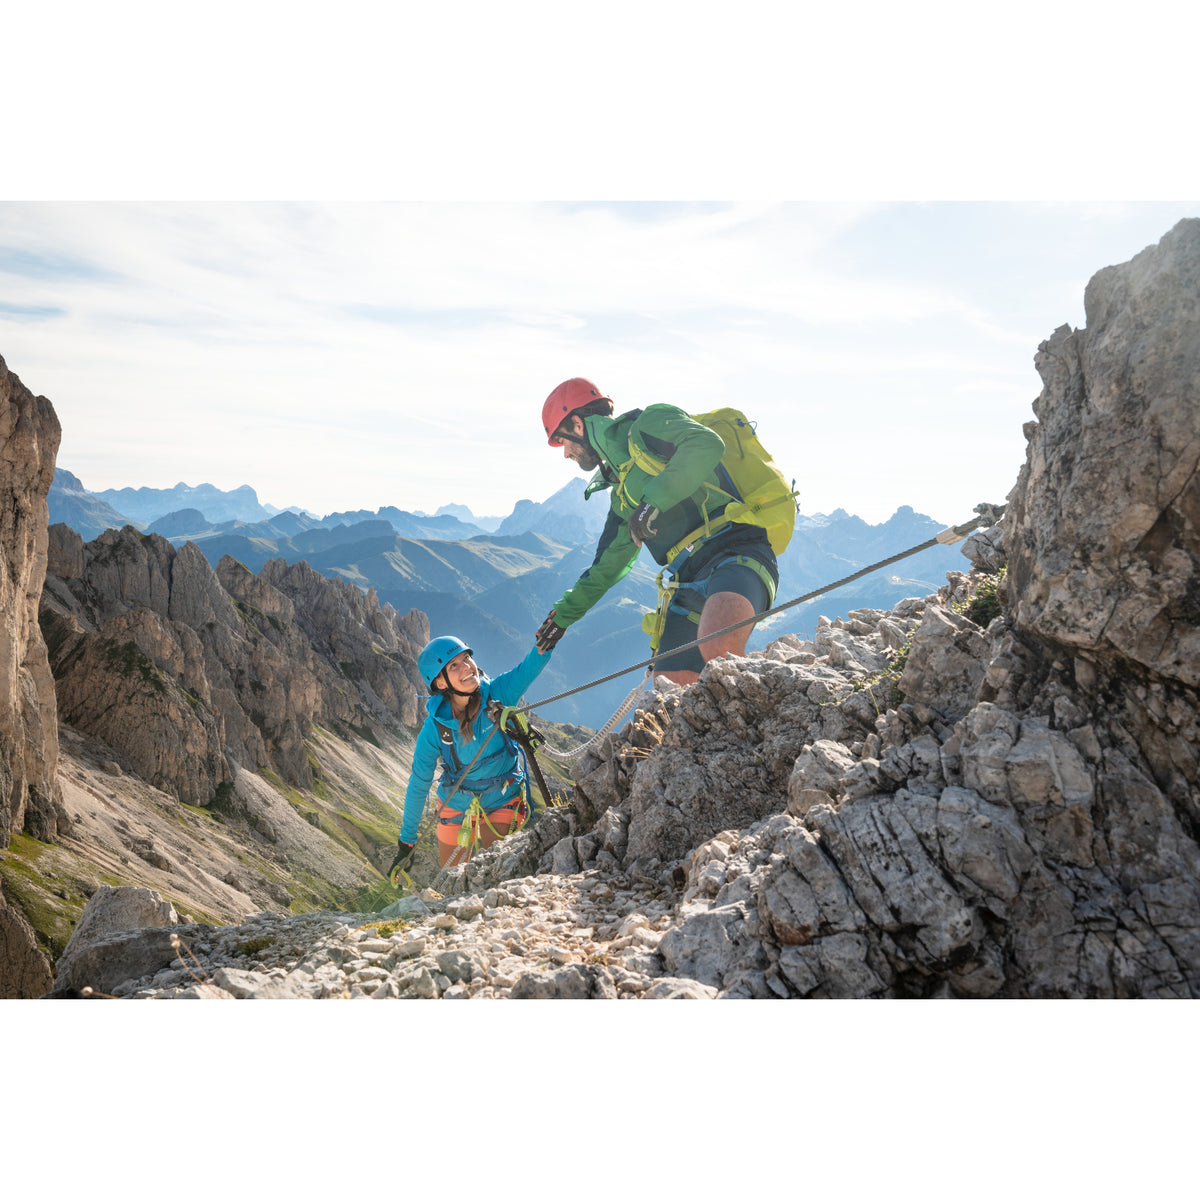 Edelrid Ultralight helmet in icemint and red colour. being used to climb via ferrata